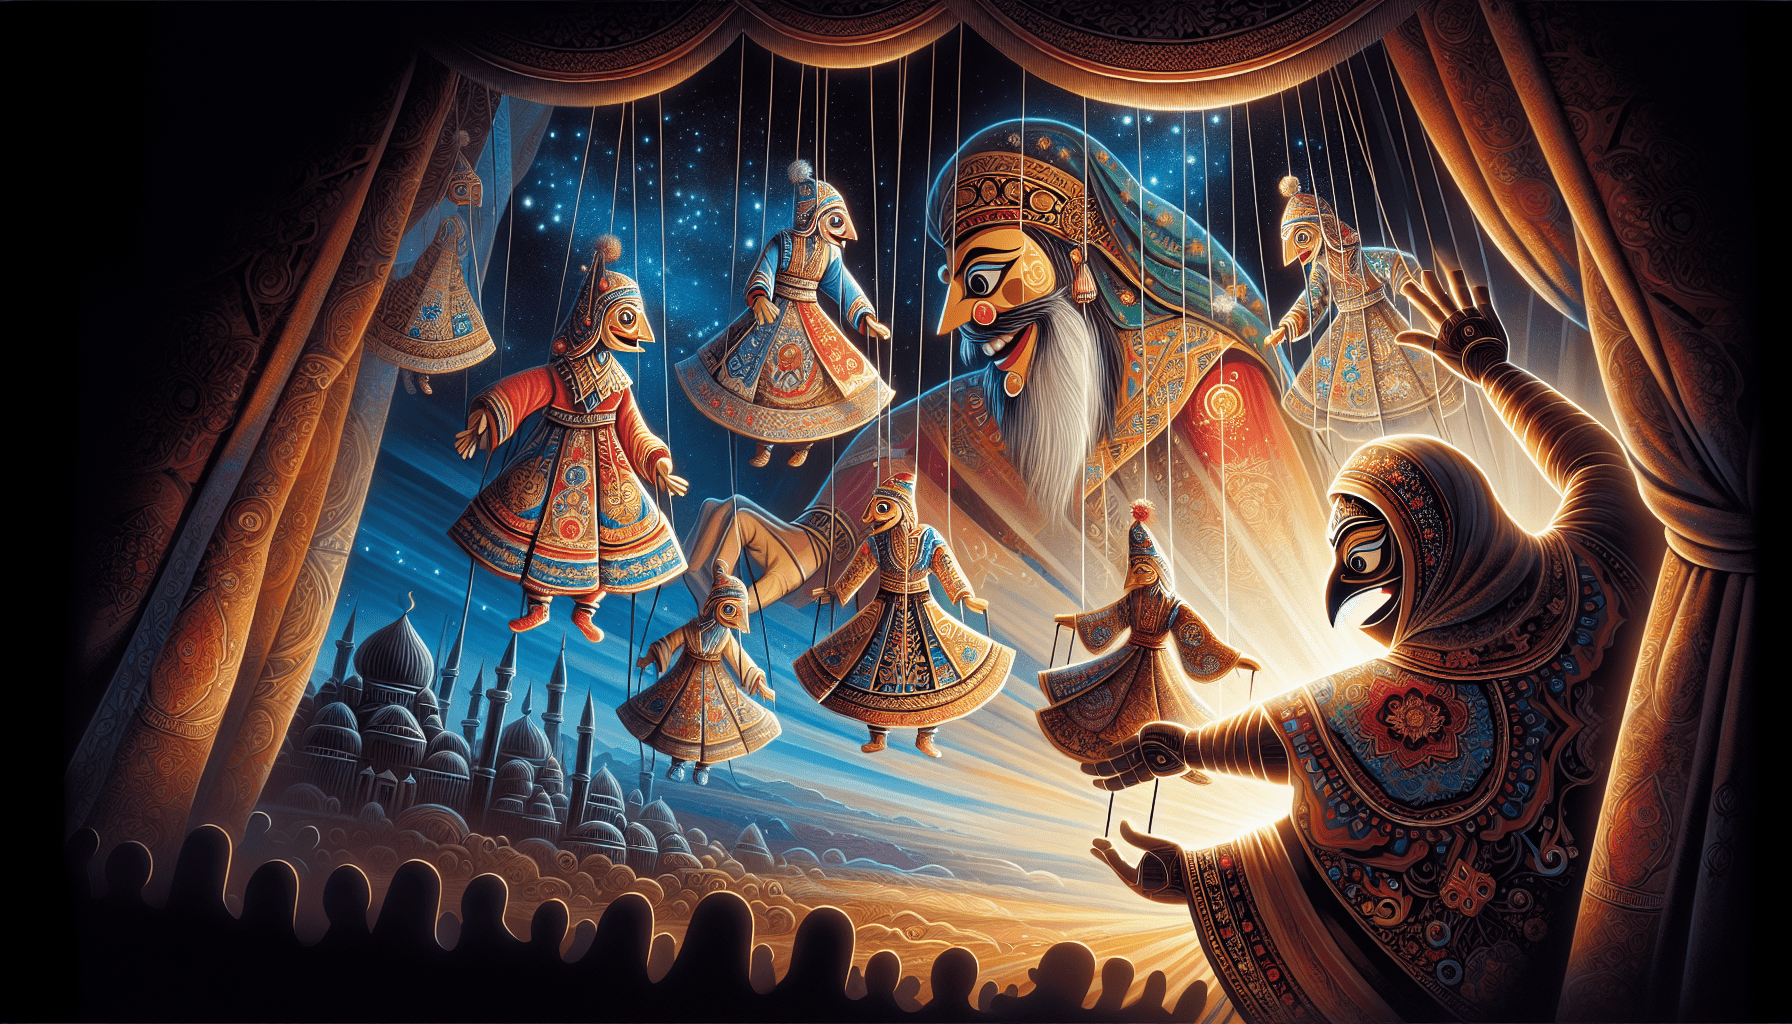 Intricately designed marionette puppets dressed in traditional Turkish costumes perform on stage, controlled by larger puppets. The background shows a nighttime sky with stars and an ornate cityscape.